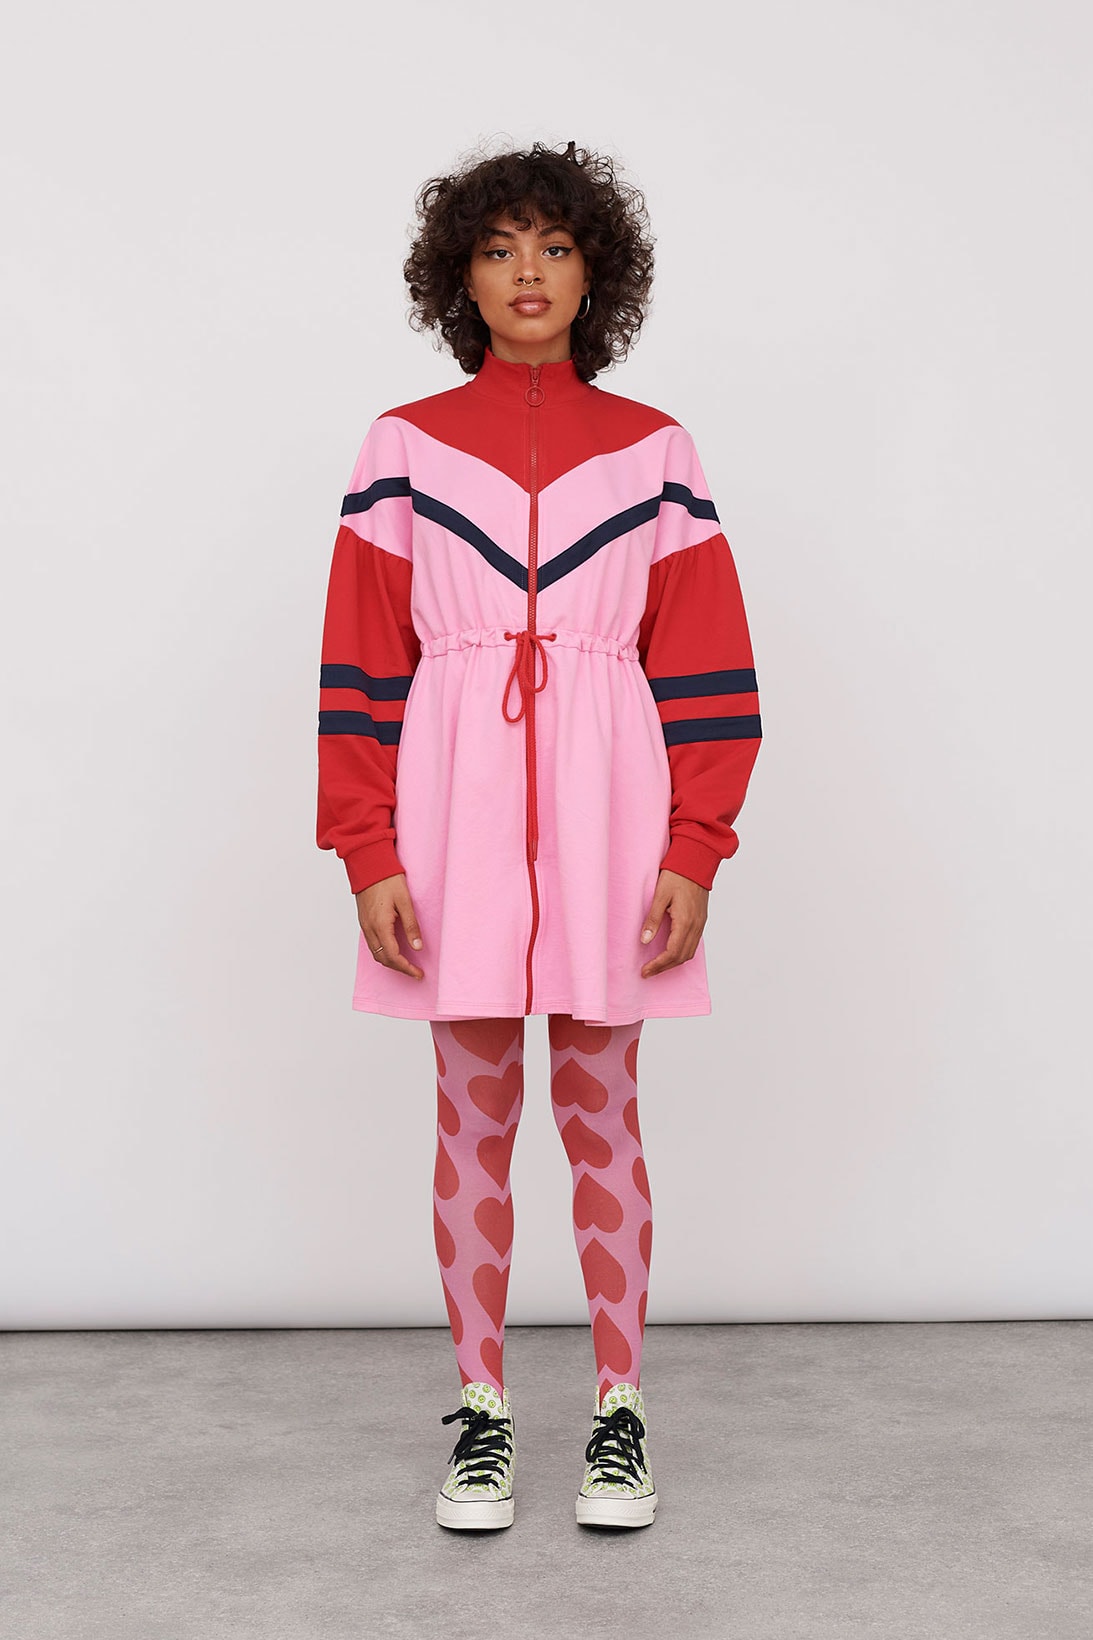 Lazy Oaf Take A Hike Outdoor Hiking Collection Lookbook Pink Red Dress Stripes Heart Tights